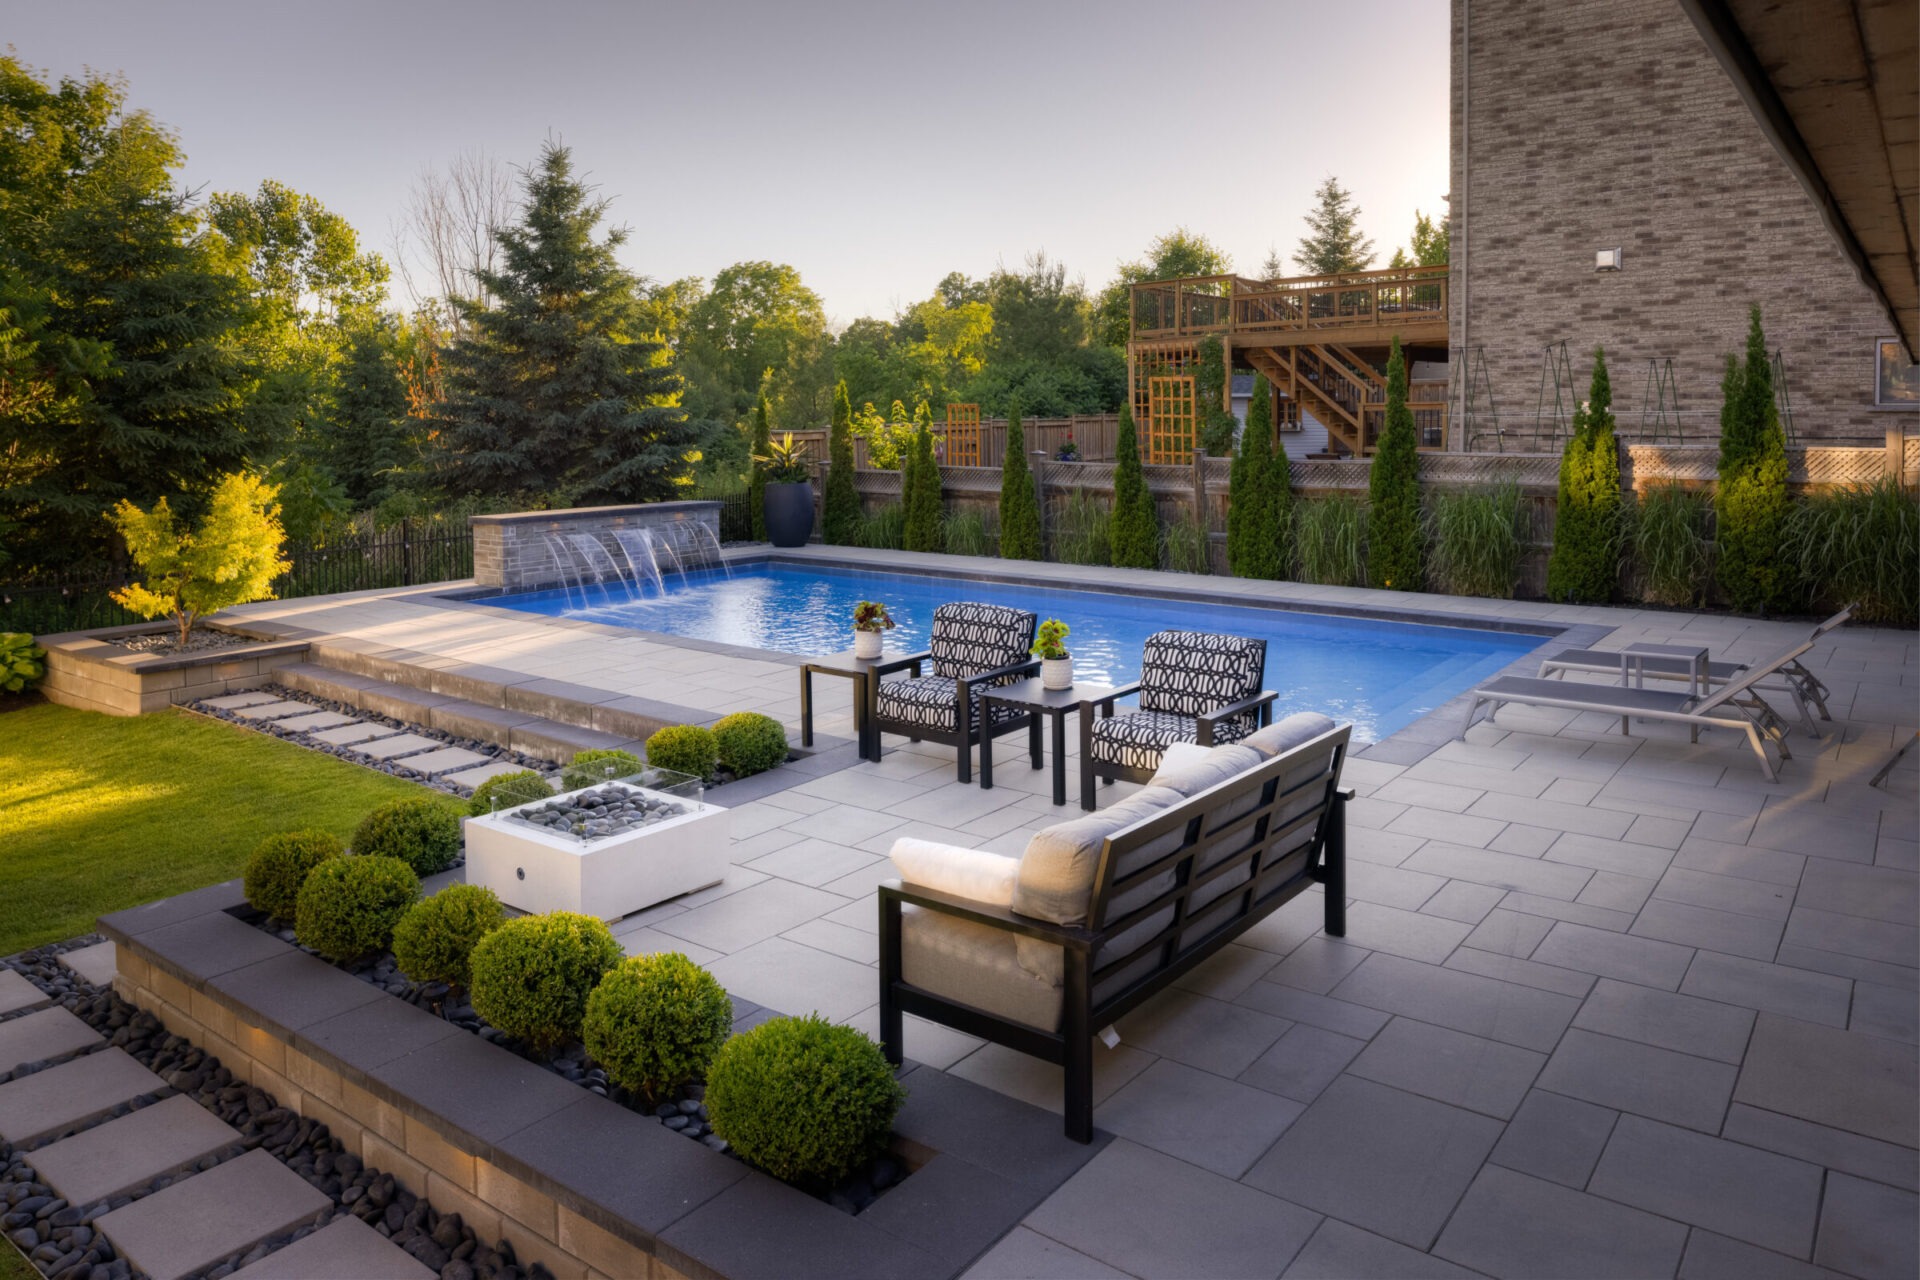 An elegant backyard featuring a swimming pool with fountains, a patio with comfortable seating, manicured greenery, and a raised wooden deck in a tranquil setting.